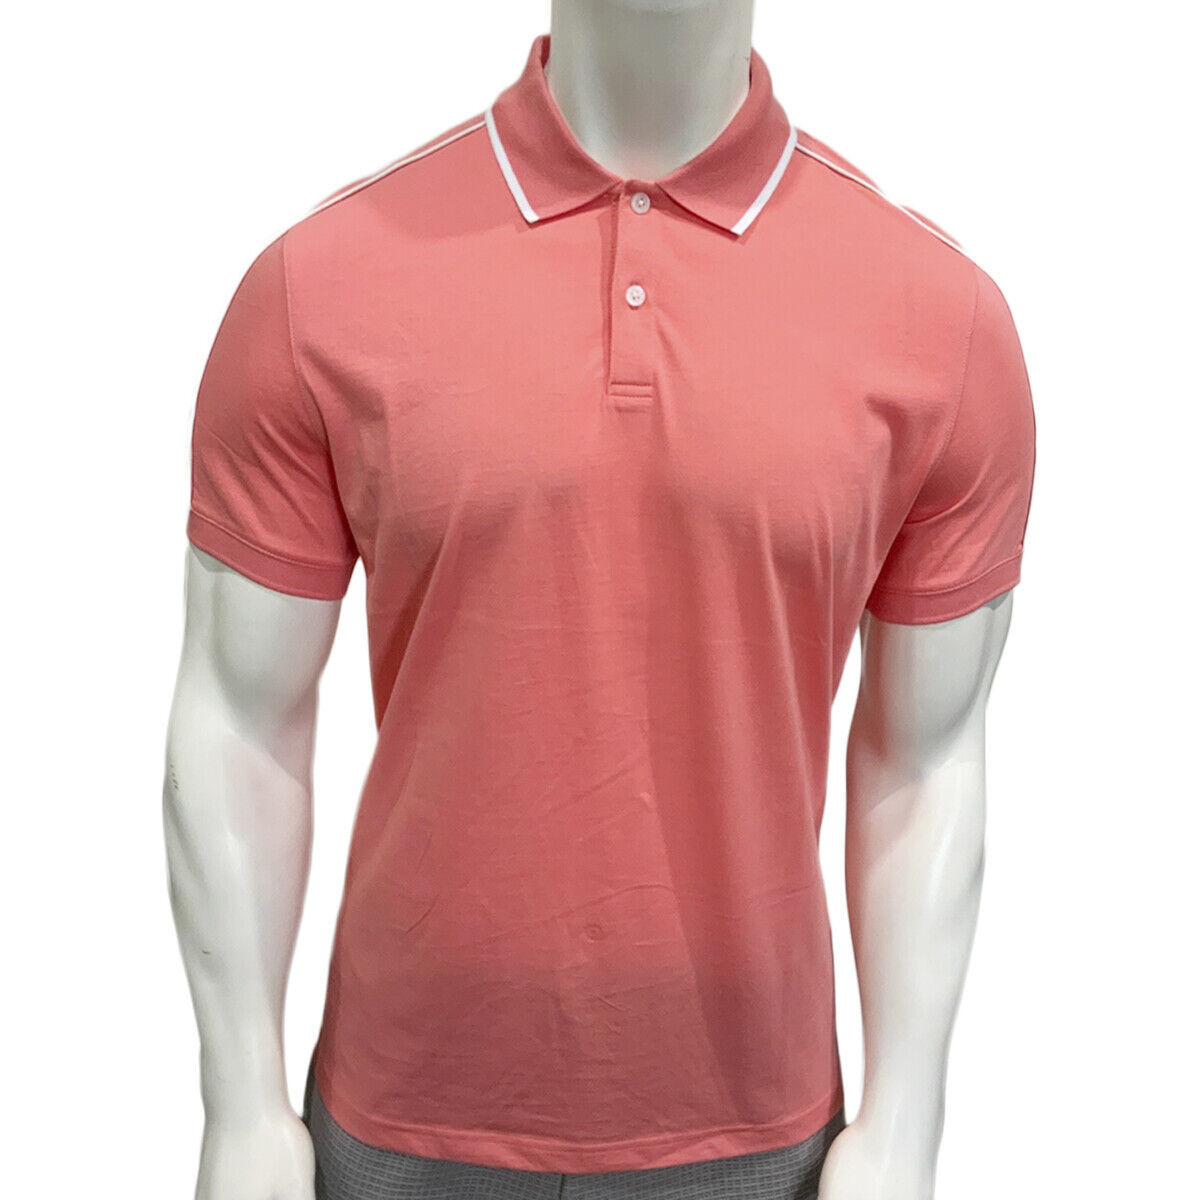 Primary image for NWT MICHAEL KORS MSRP $64.99 MEN'S CARIBAN PINK SHORT SLEEVE POLO SHIRT SIZE XL